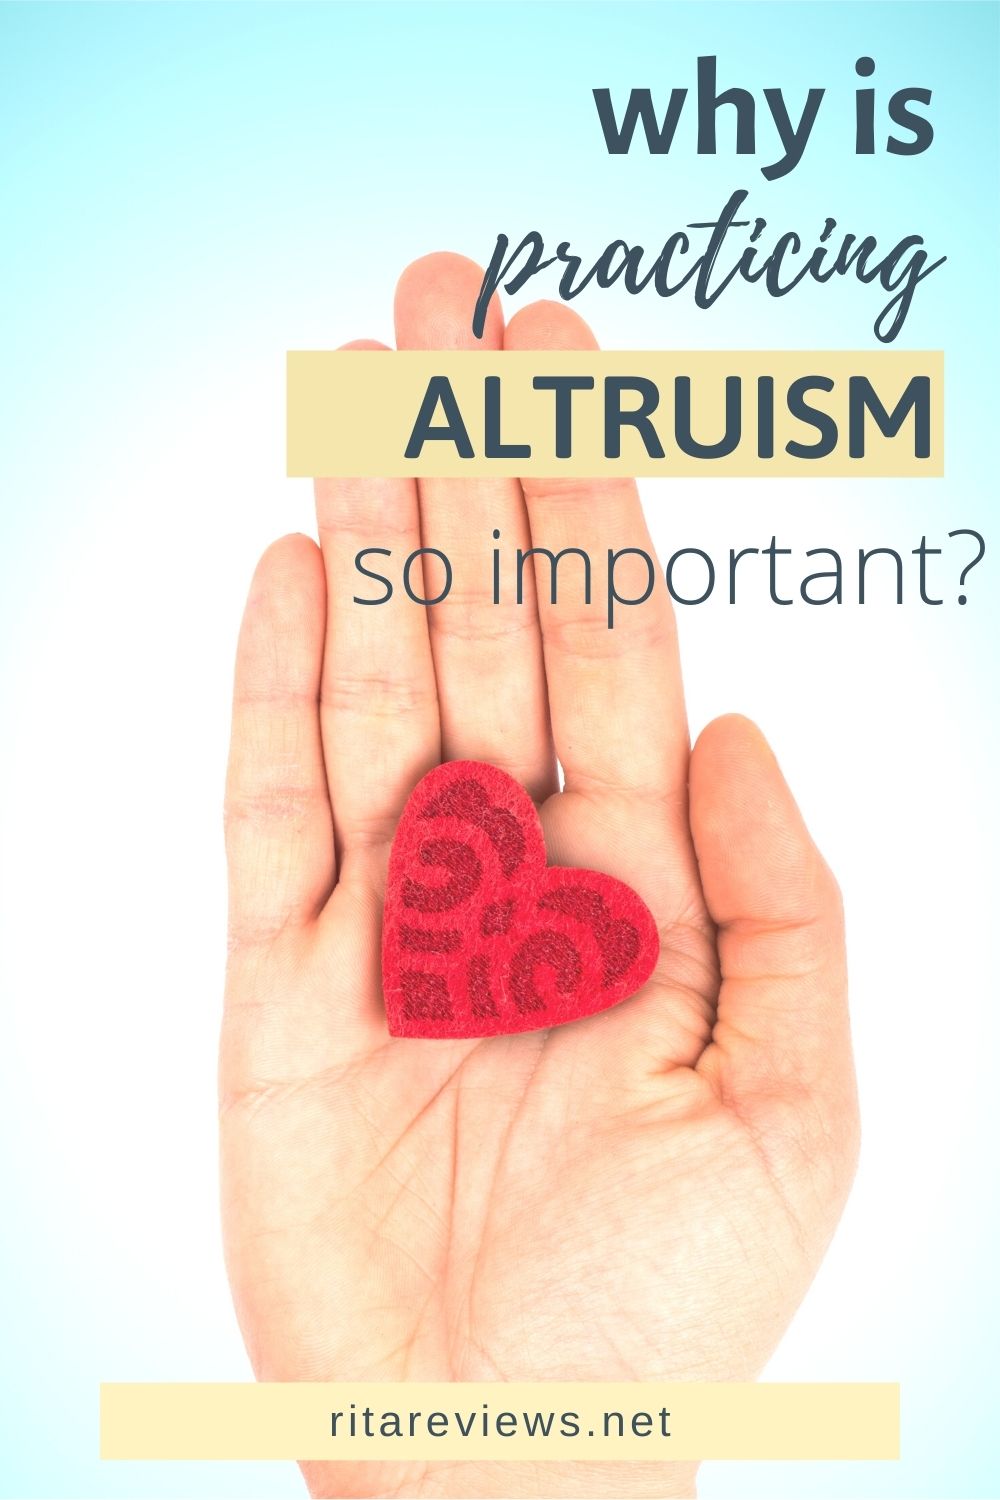 Why is Practicing Altruism so Important